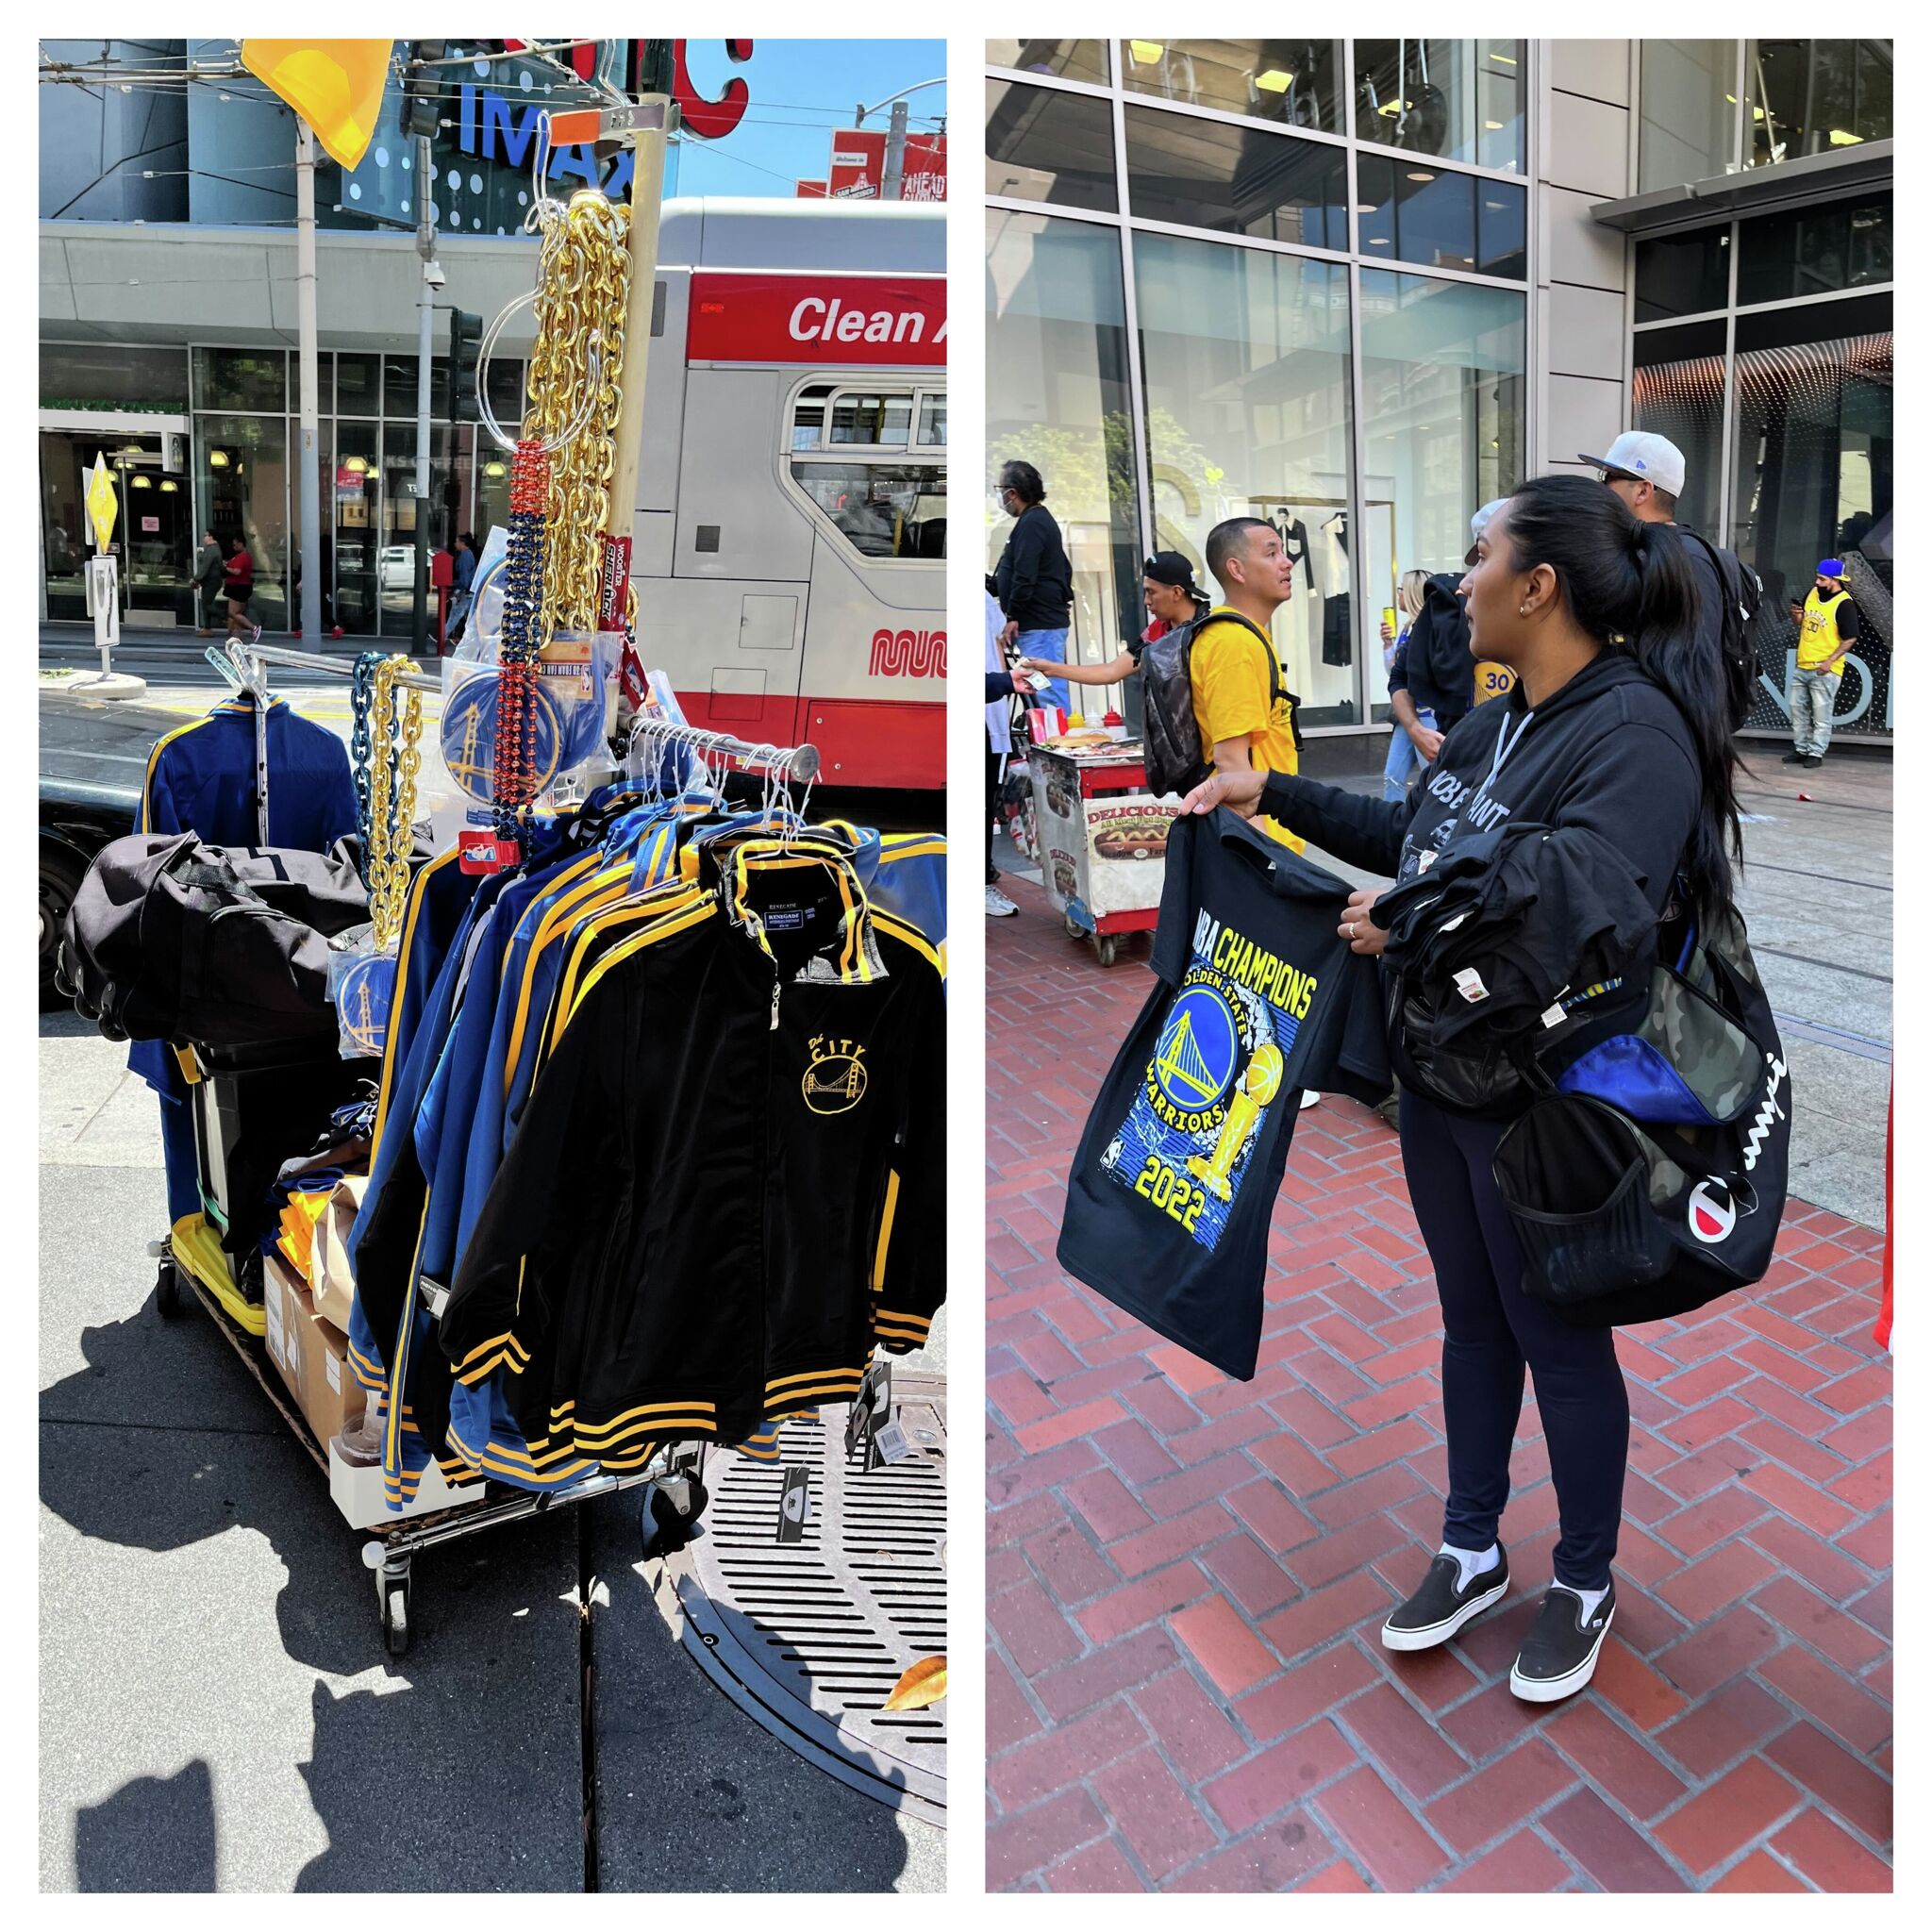 The off-brand merch sold during Dubs parade was mostly hilarious